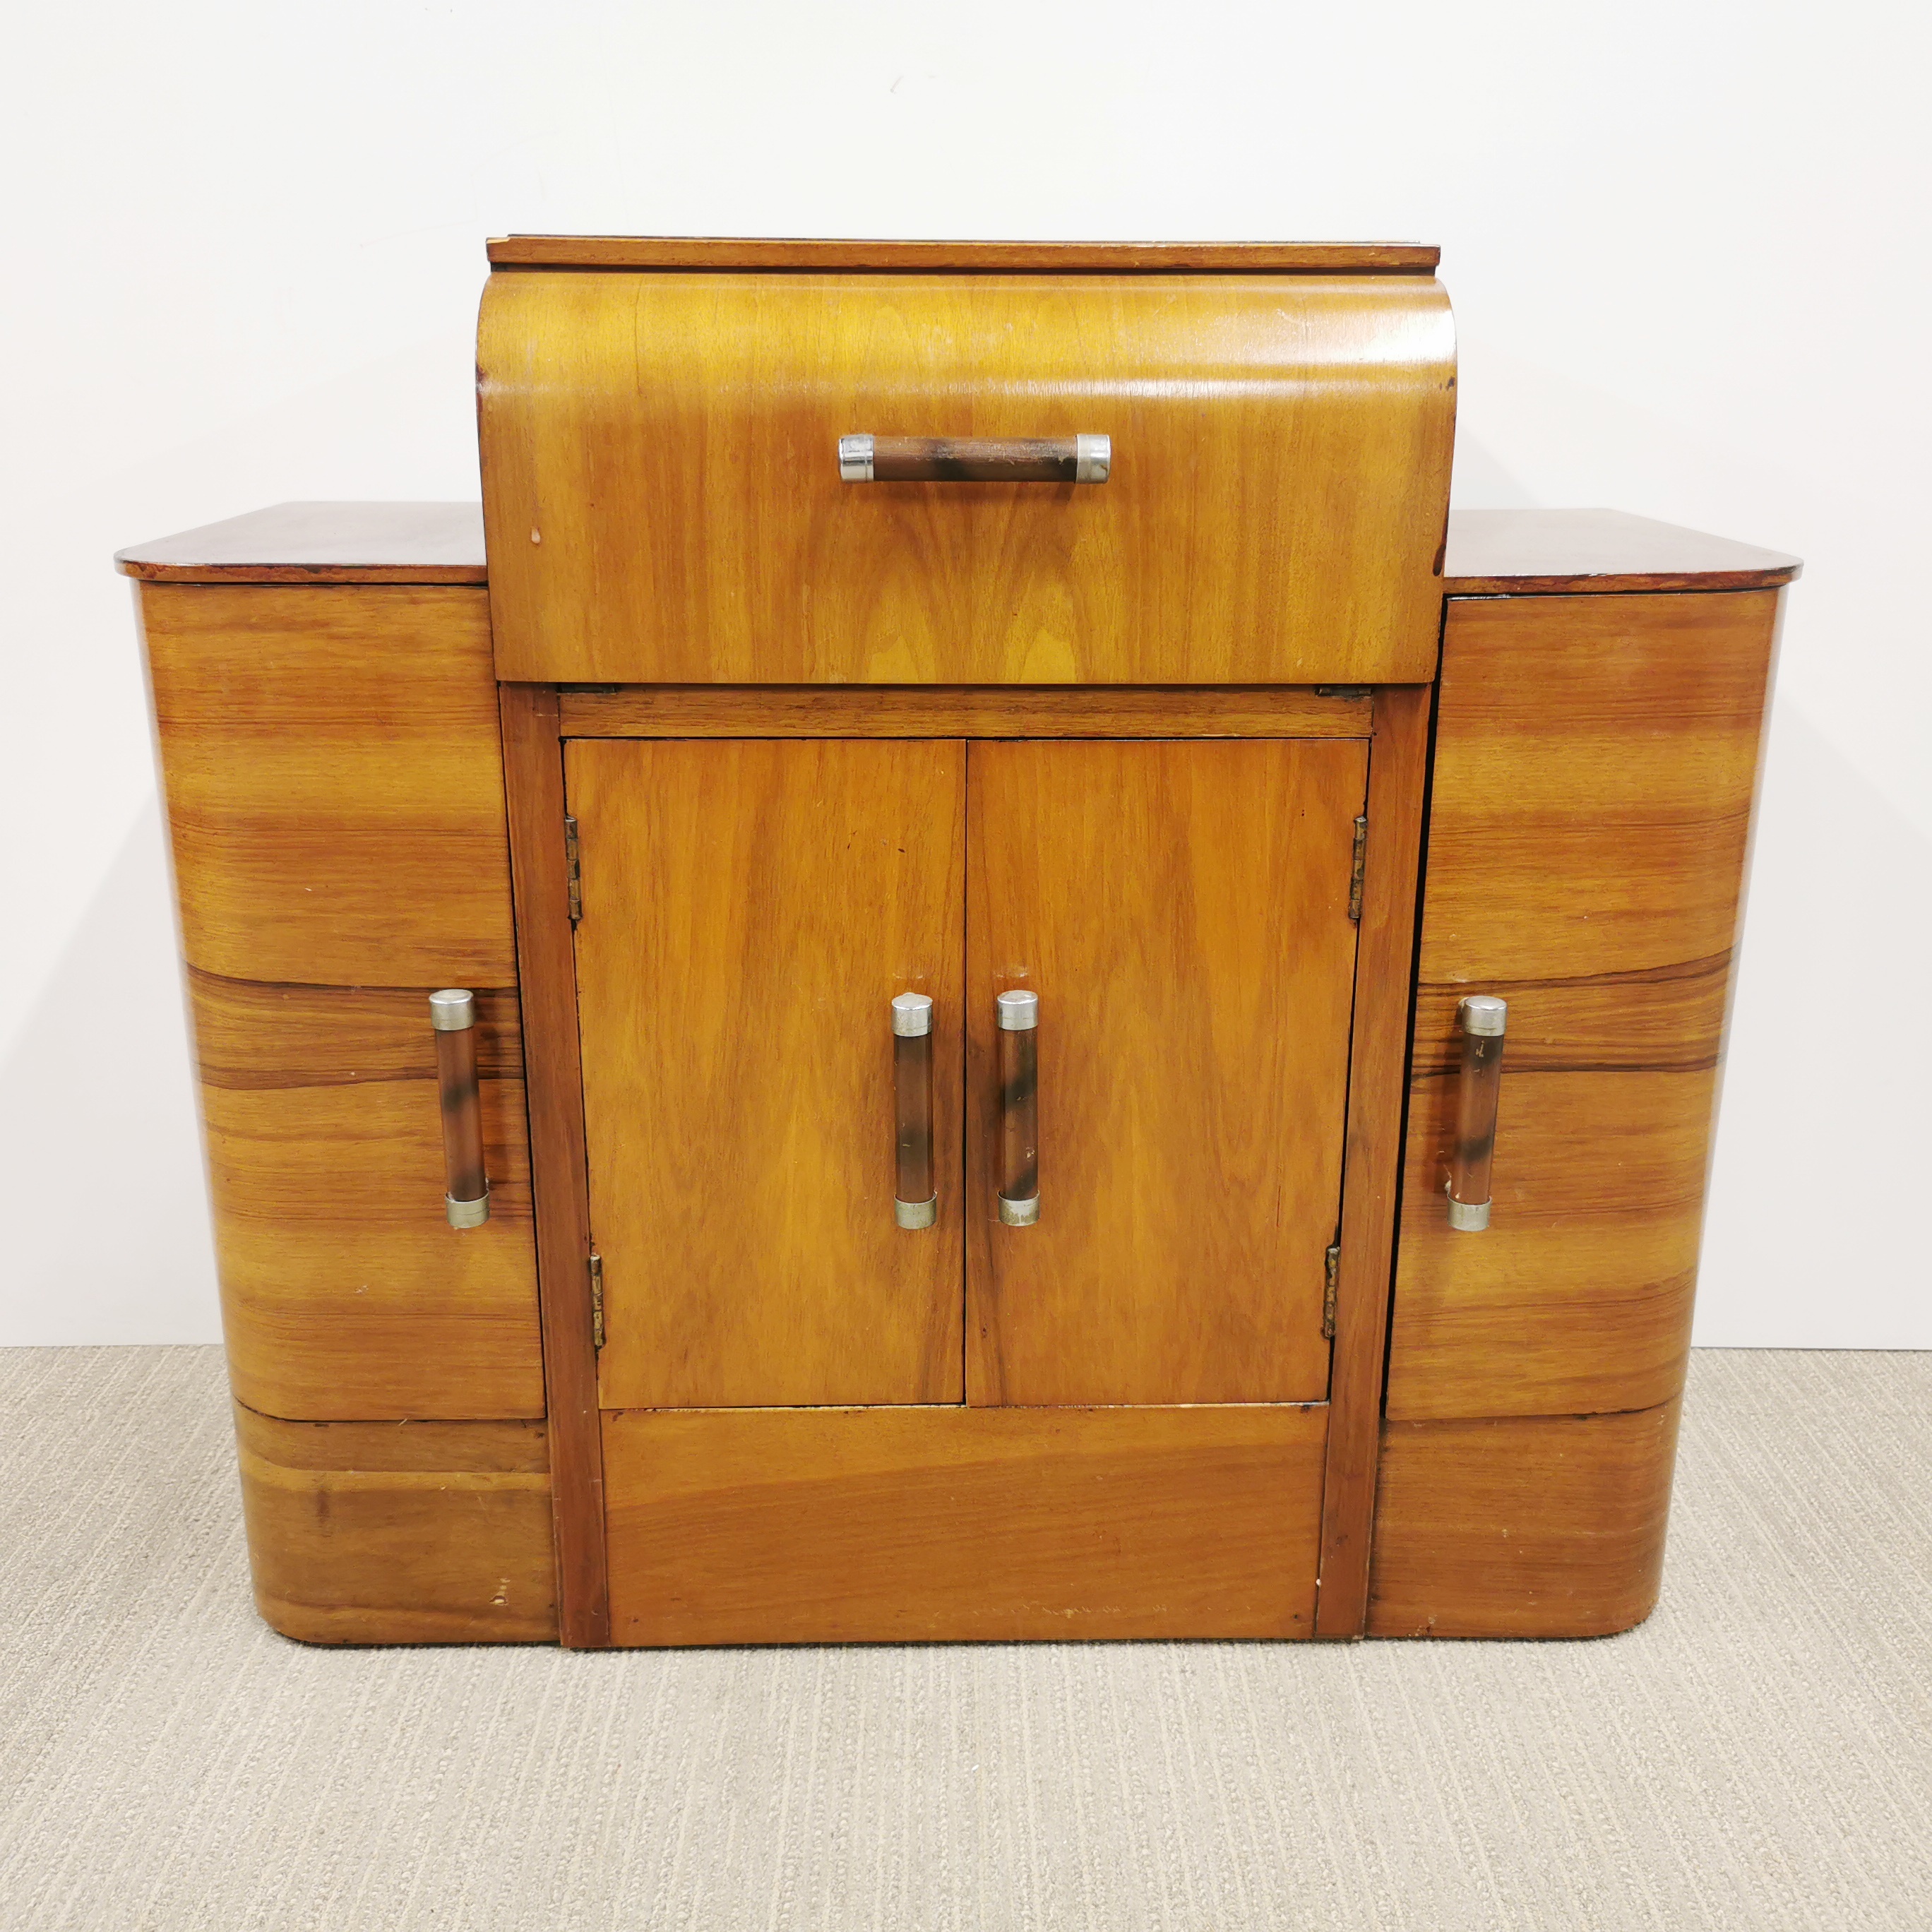 An Art Deco beechwood veneered cabinet with drop down front, 90 x 78 x 38cm. Together with an Art